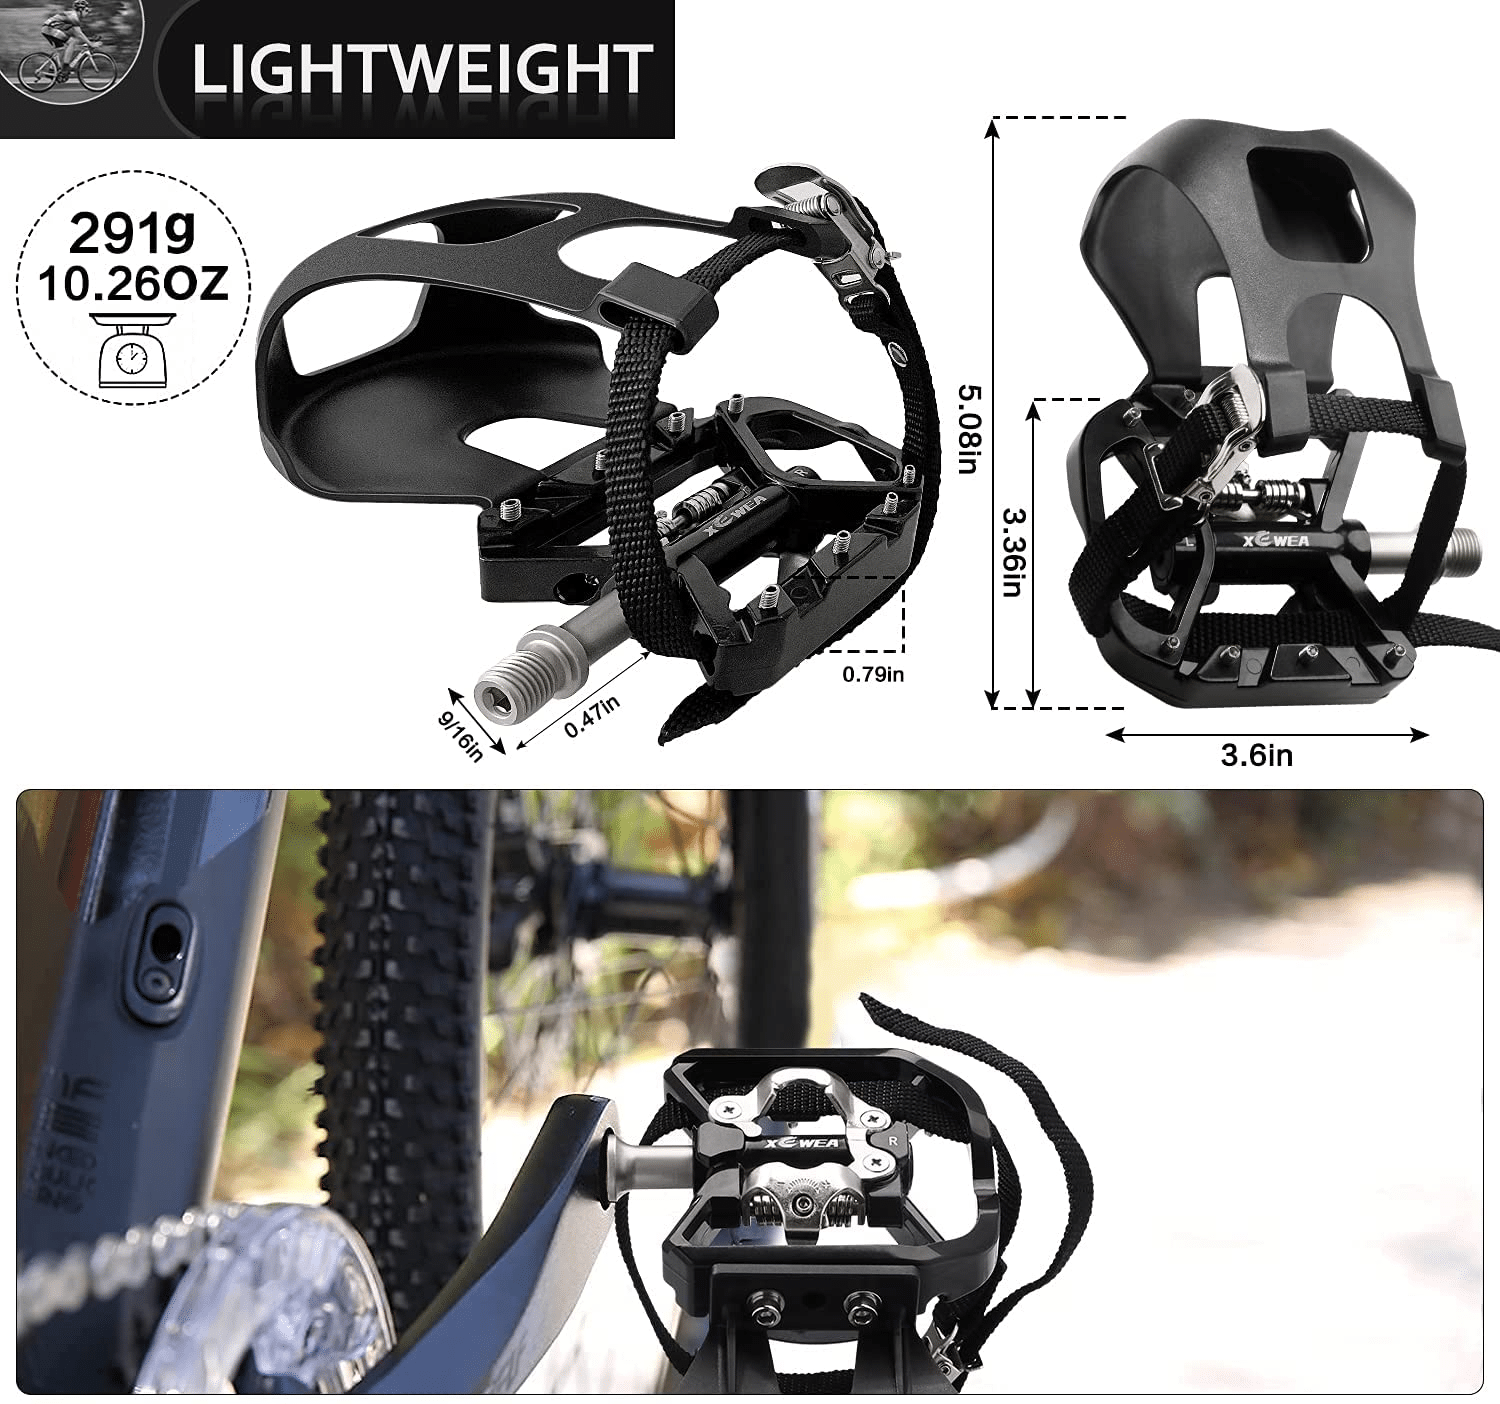 Toes clips are a cost-effective way to keep your feet secured to your bicycle pedals when riding.